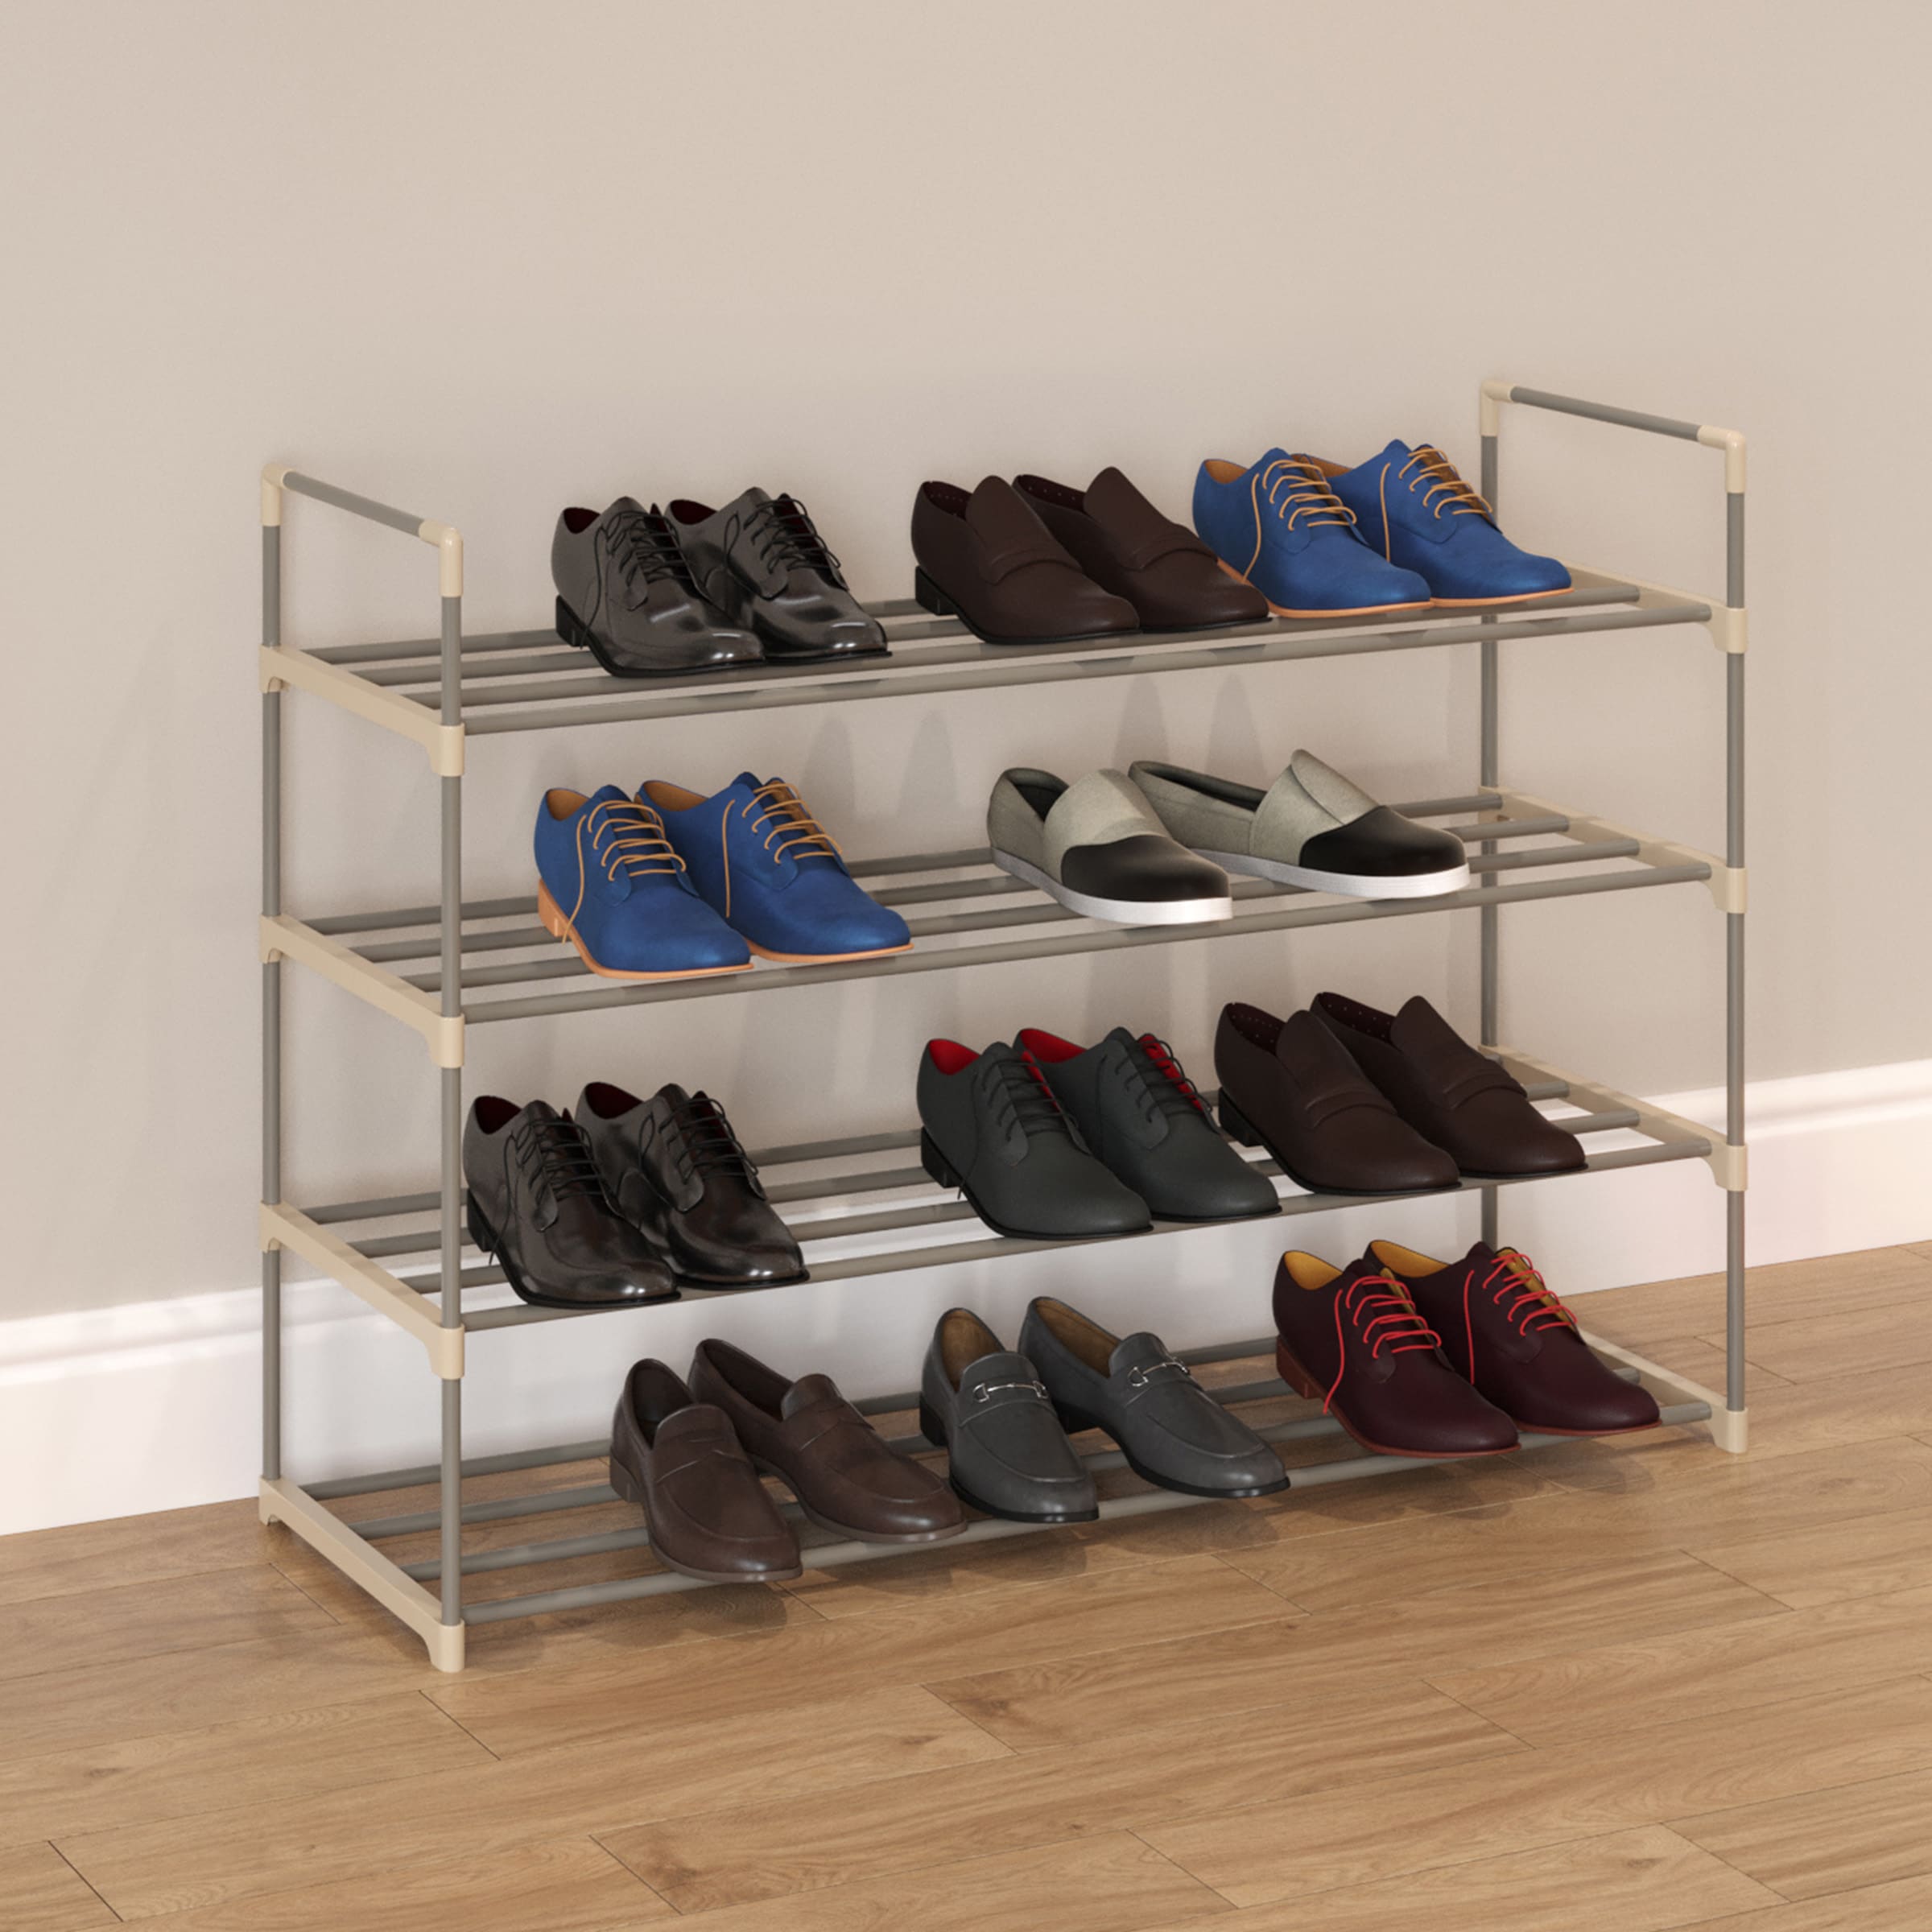 Hastings Home 1 Tier White Plastic Over-the-door Shoe Organizer at